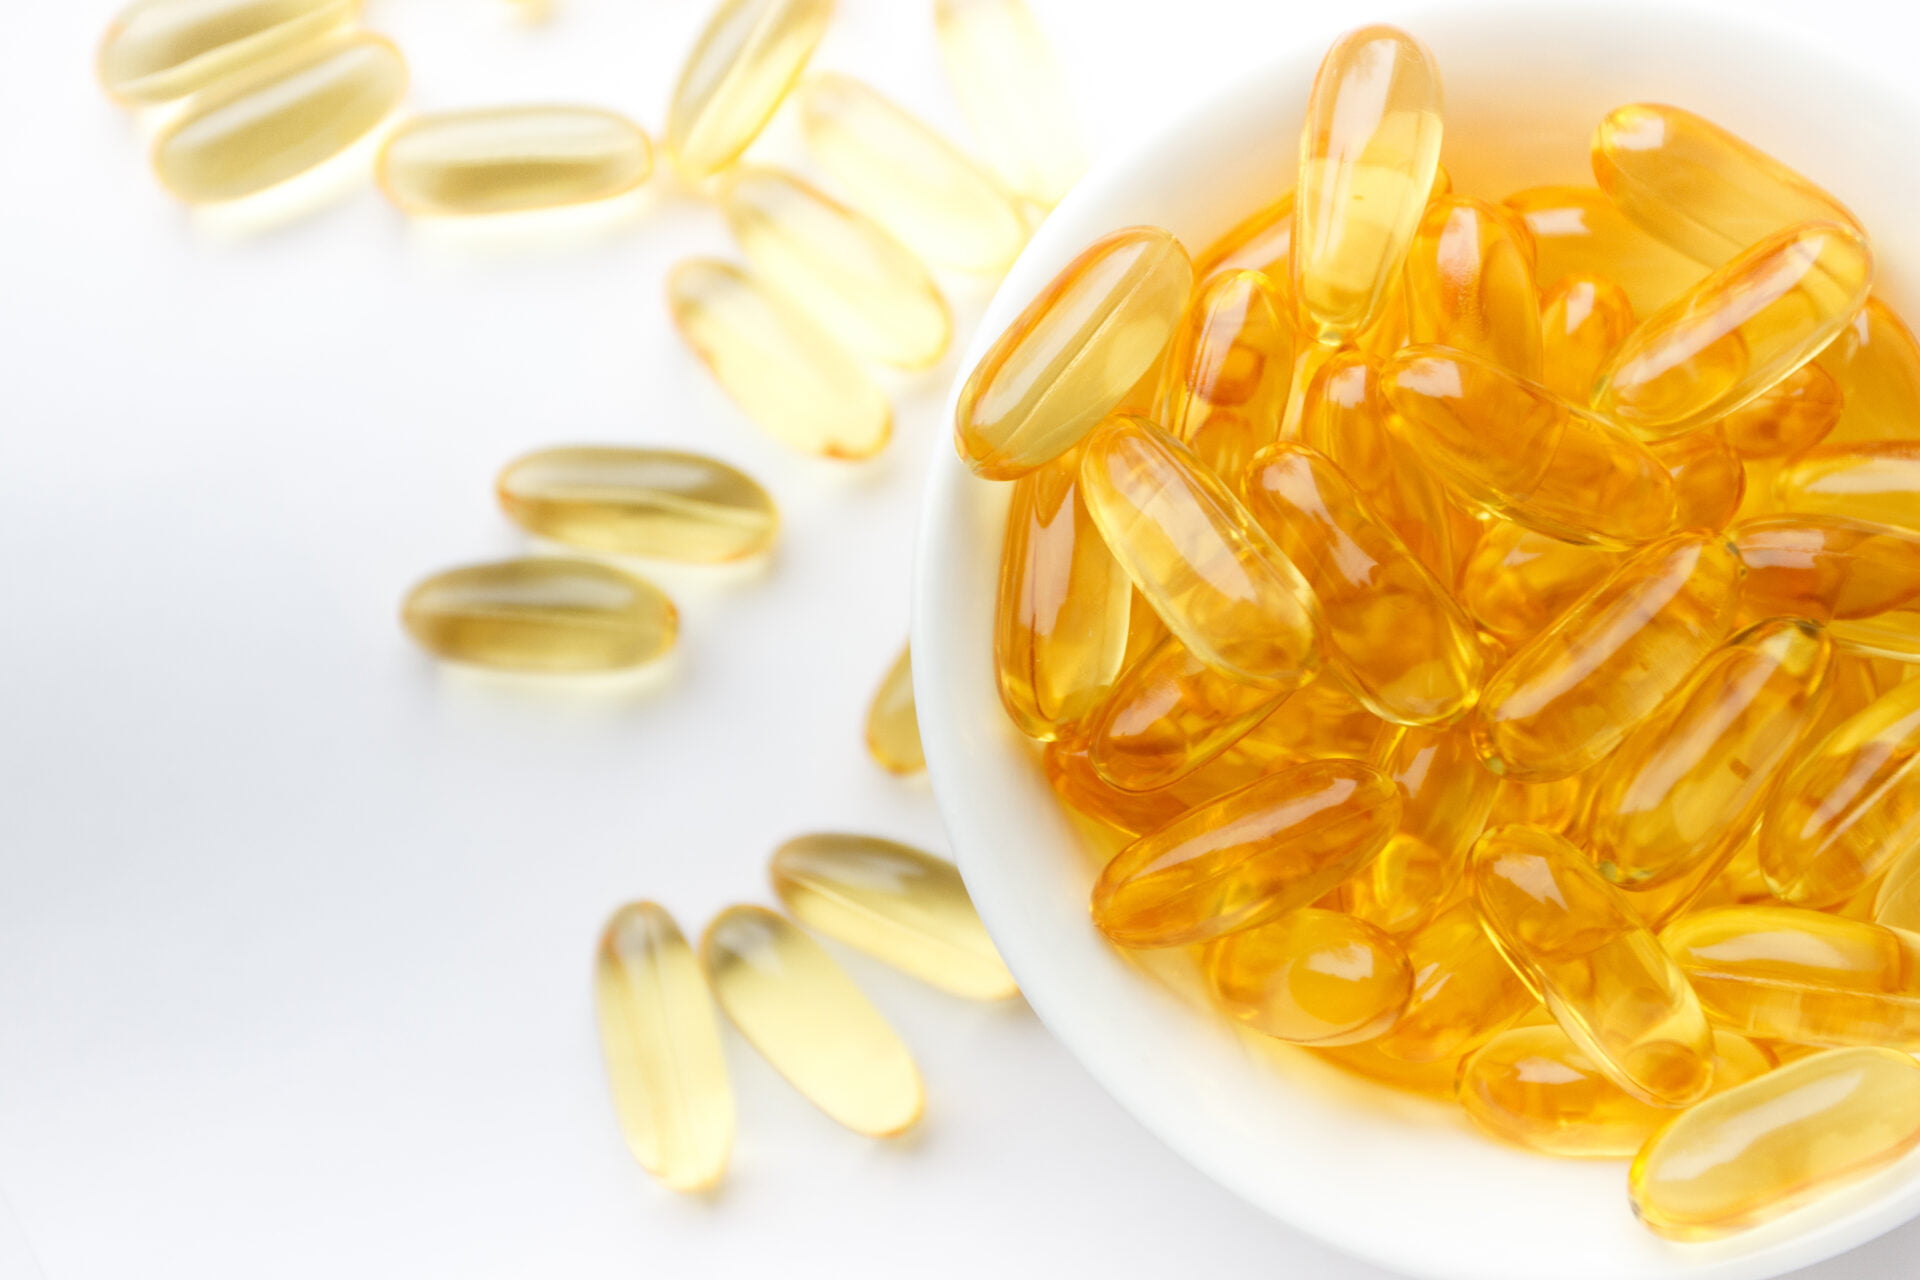 Dietary supplementation. Capsules of fish oil in the white bowl on the light background